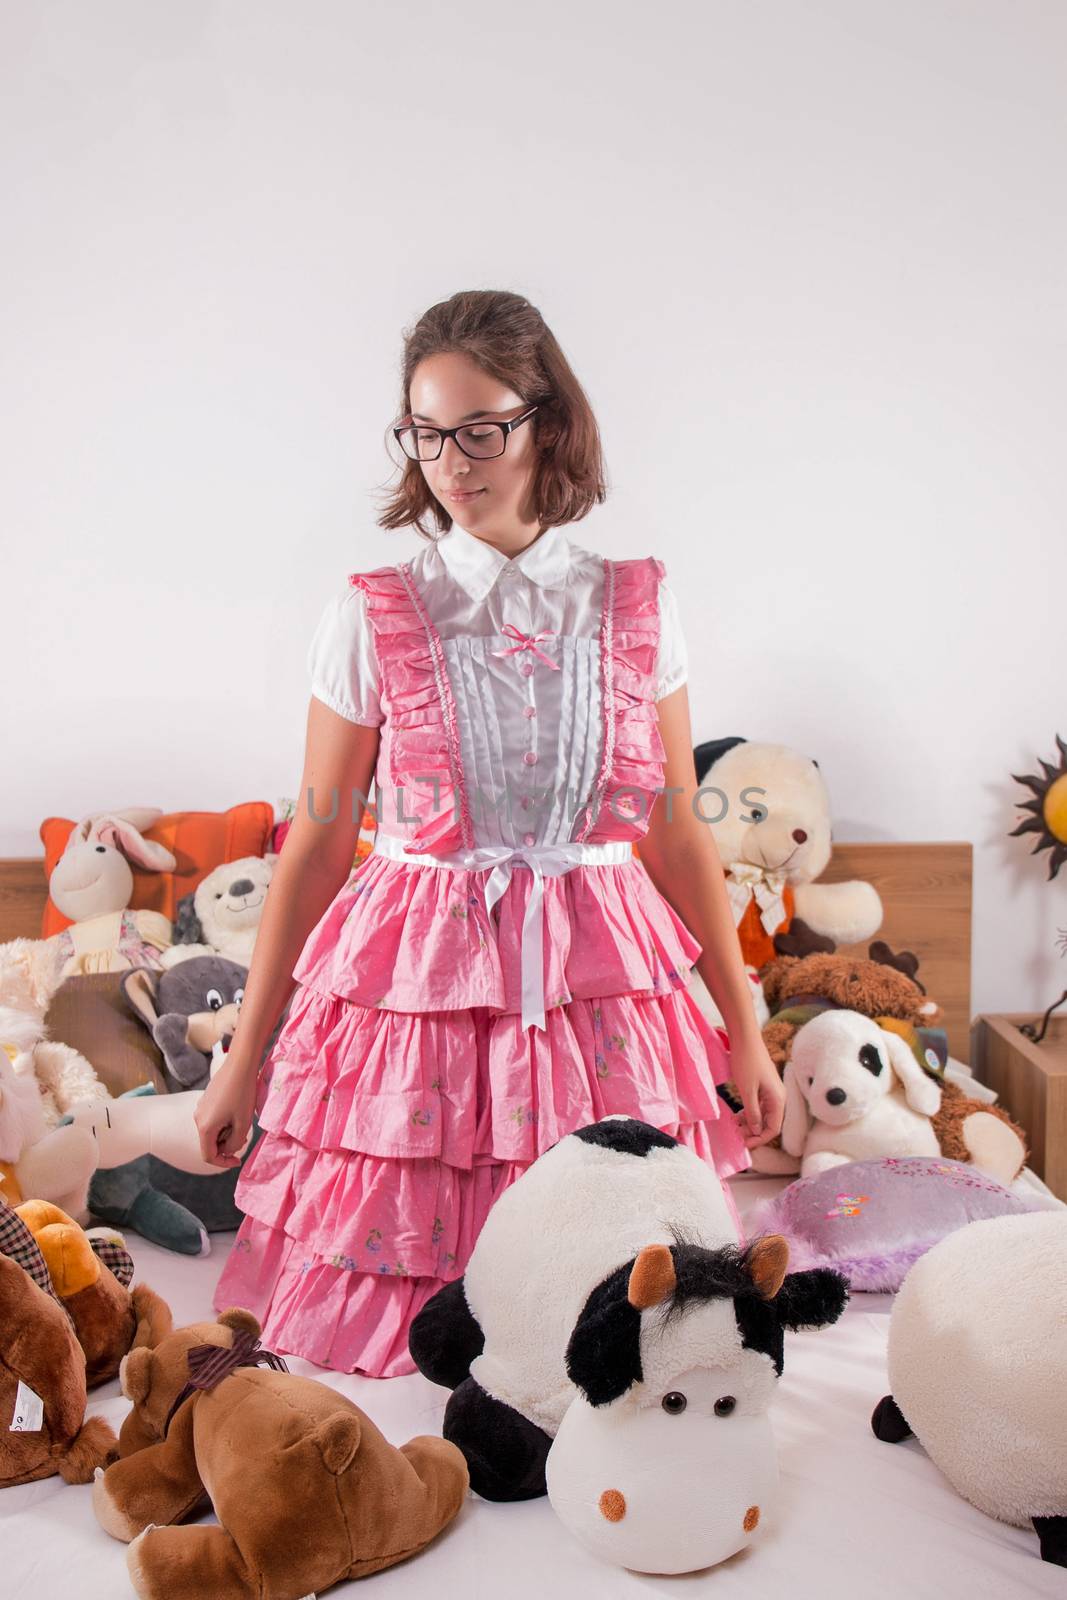 View of a young girl in a bedroom in a pink cute dress surrounded by stuffed toys.